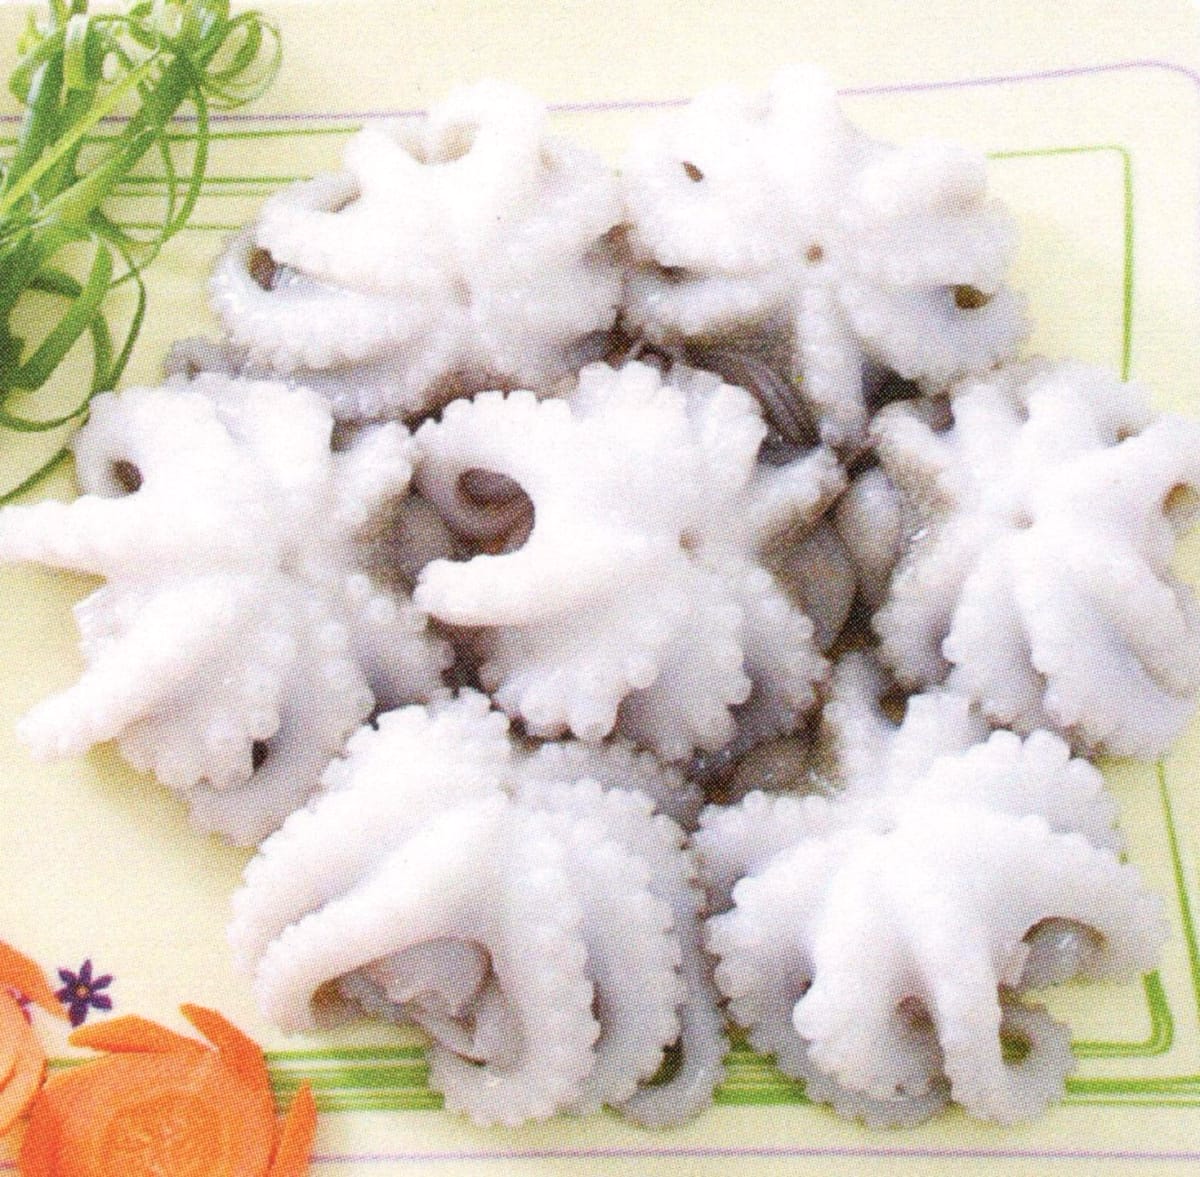 Baby Octopus
Available in Whole Cleaned 

Sizes: Various